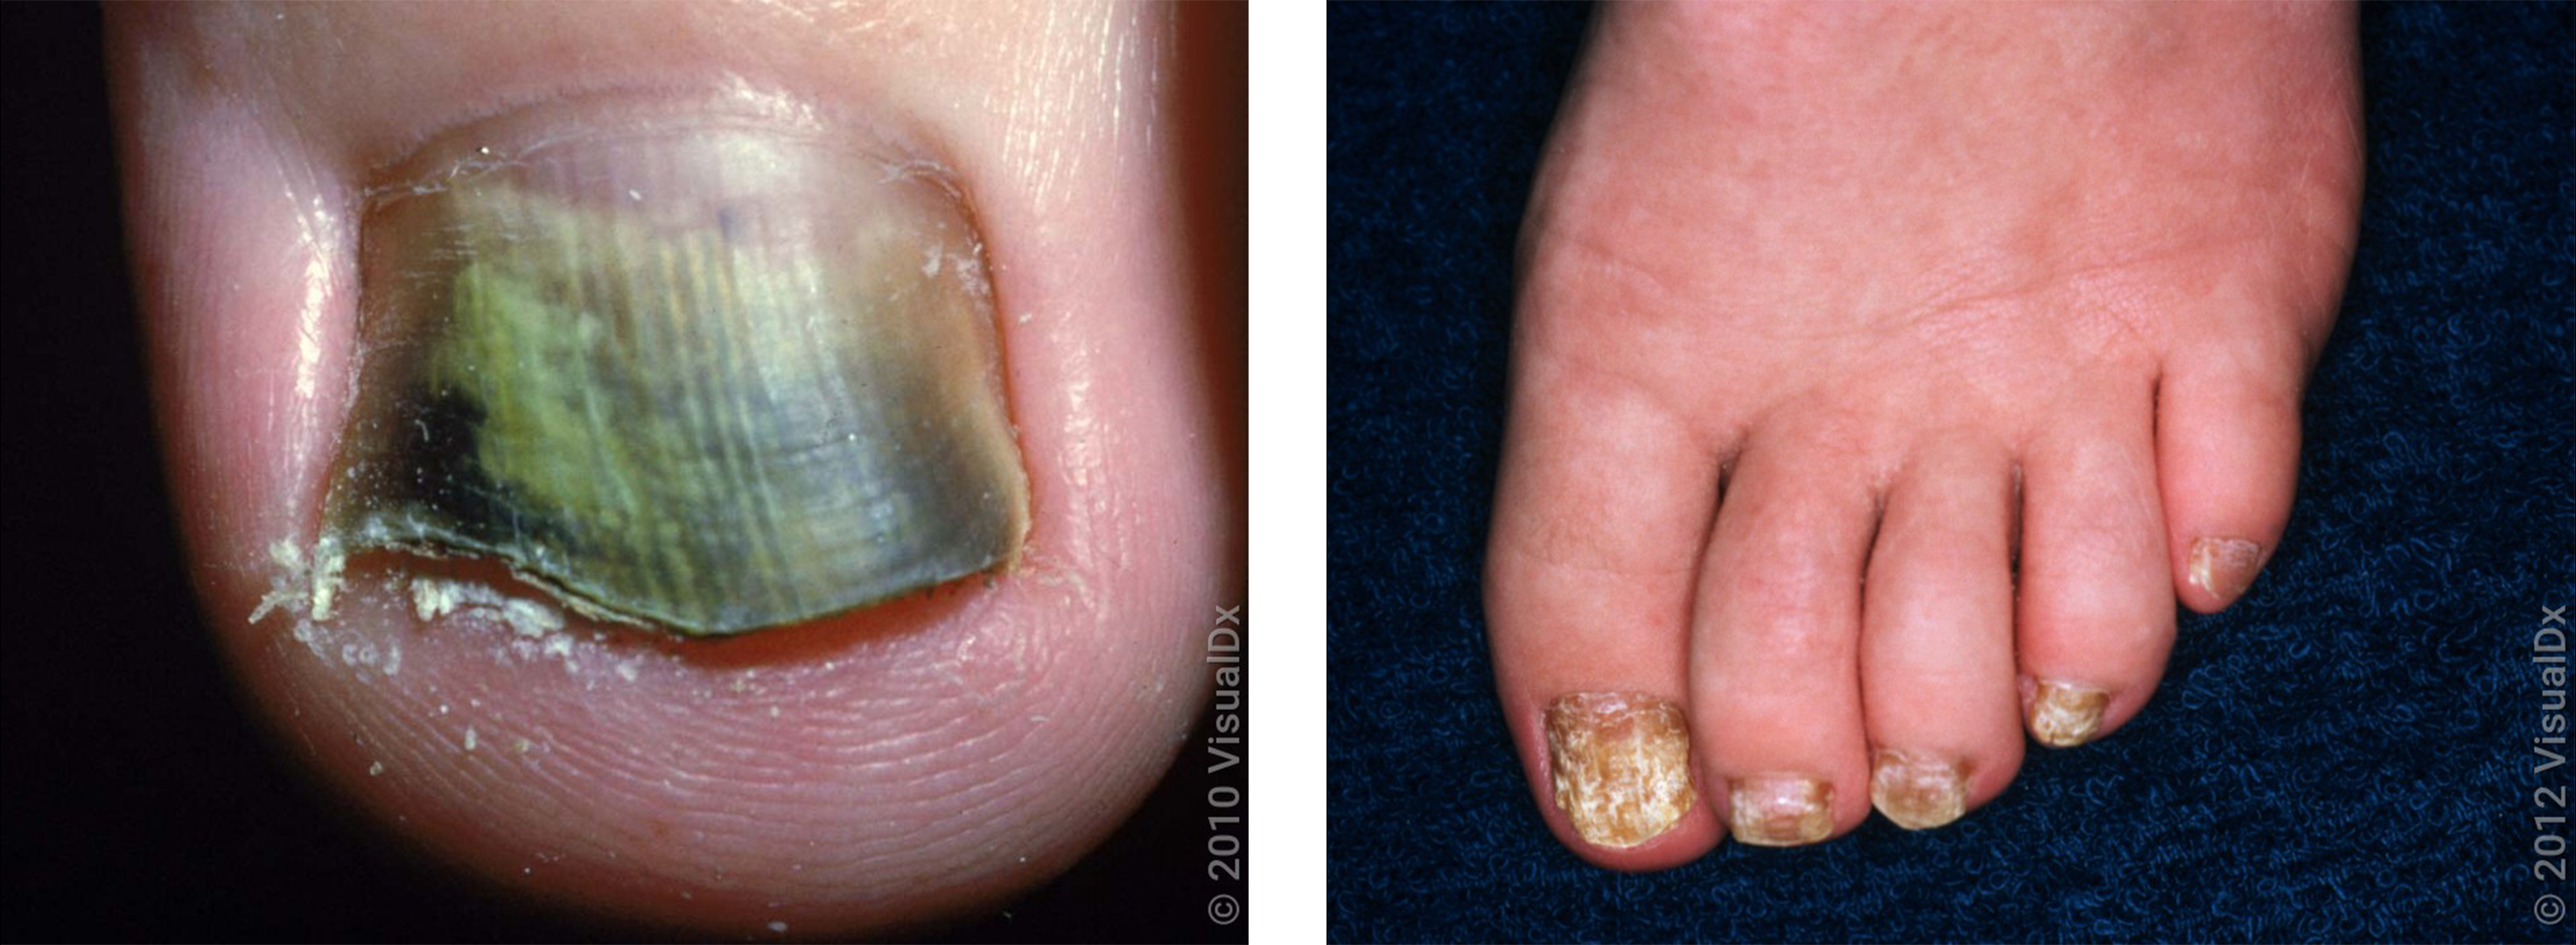 Fungal Nail Infection, Causes, Signs and Symptoms, Diagnosis and Treatment.  - YouTube